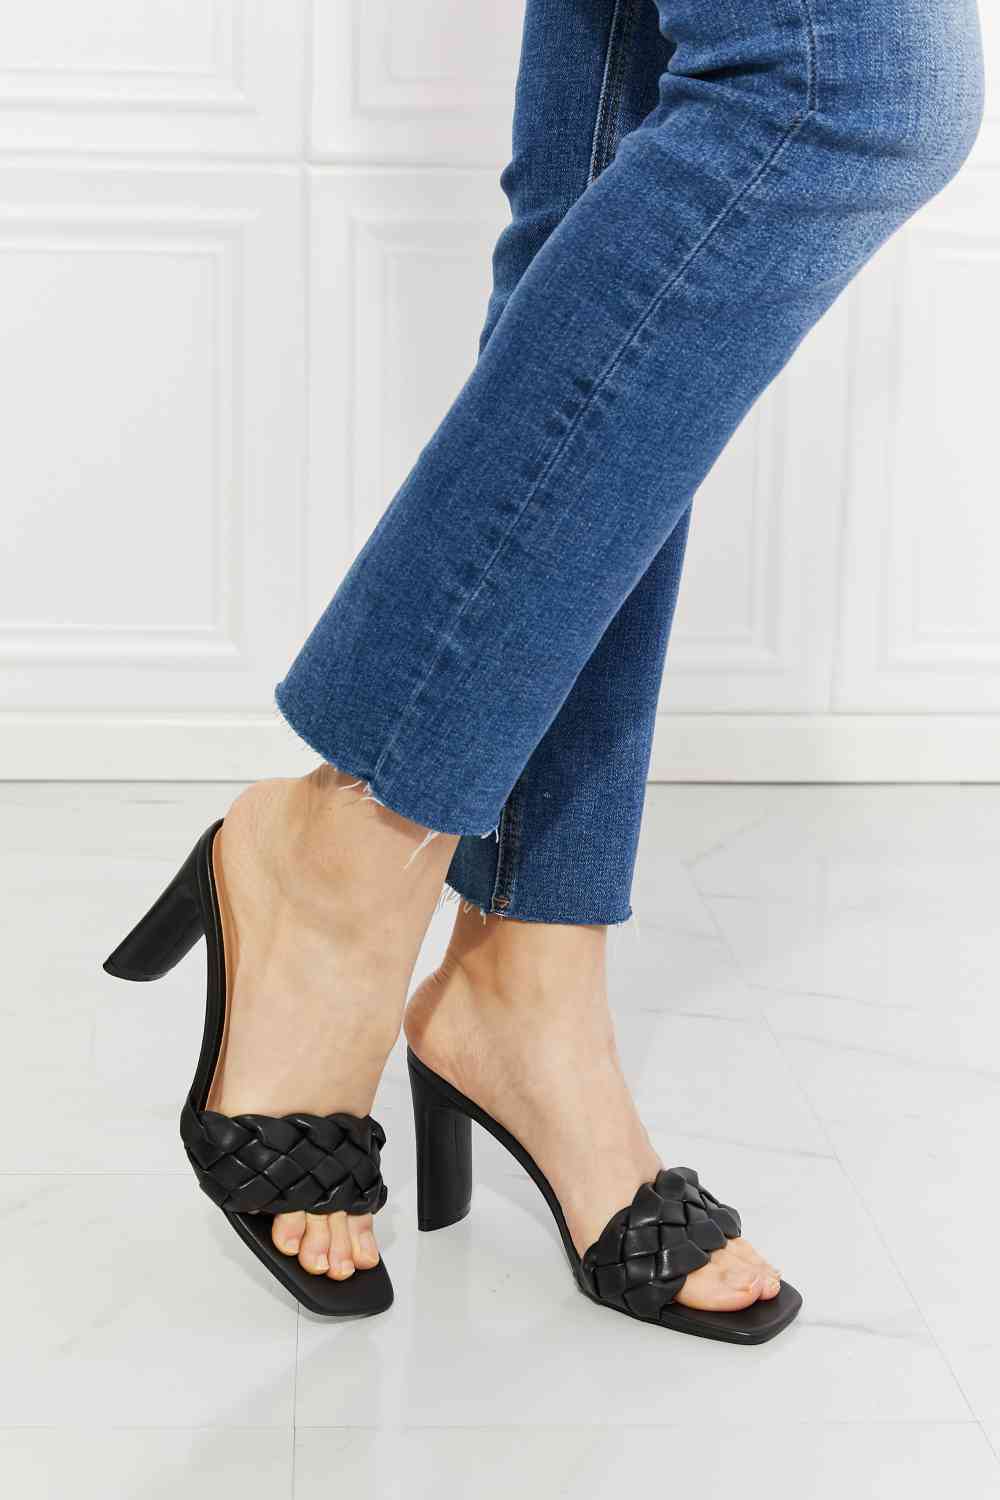 Dark Slate Gray MMShoes Top of the World Braided Block Heel Sandals in Black Shoes